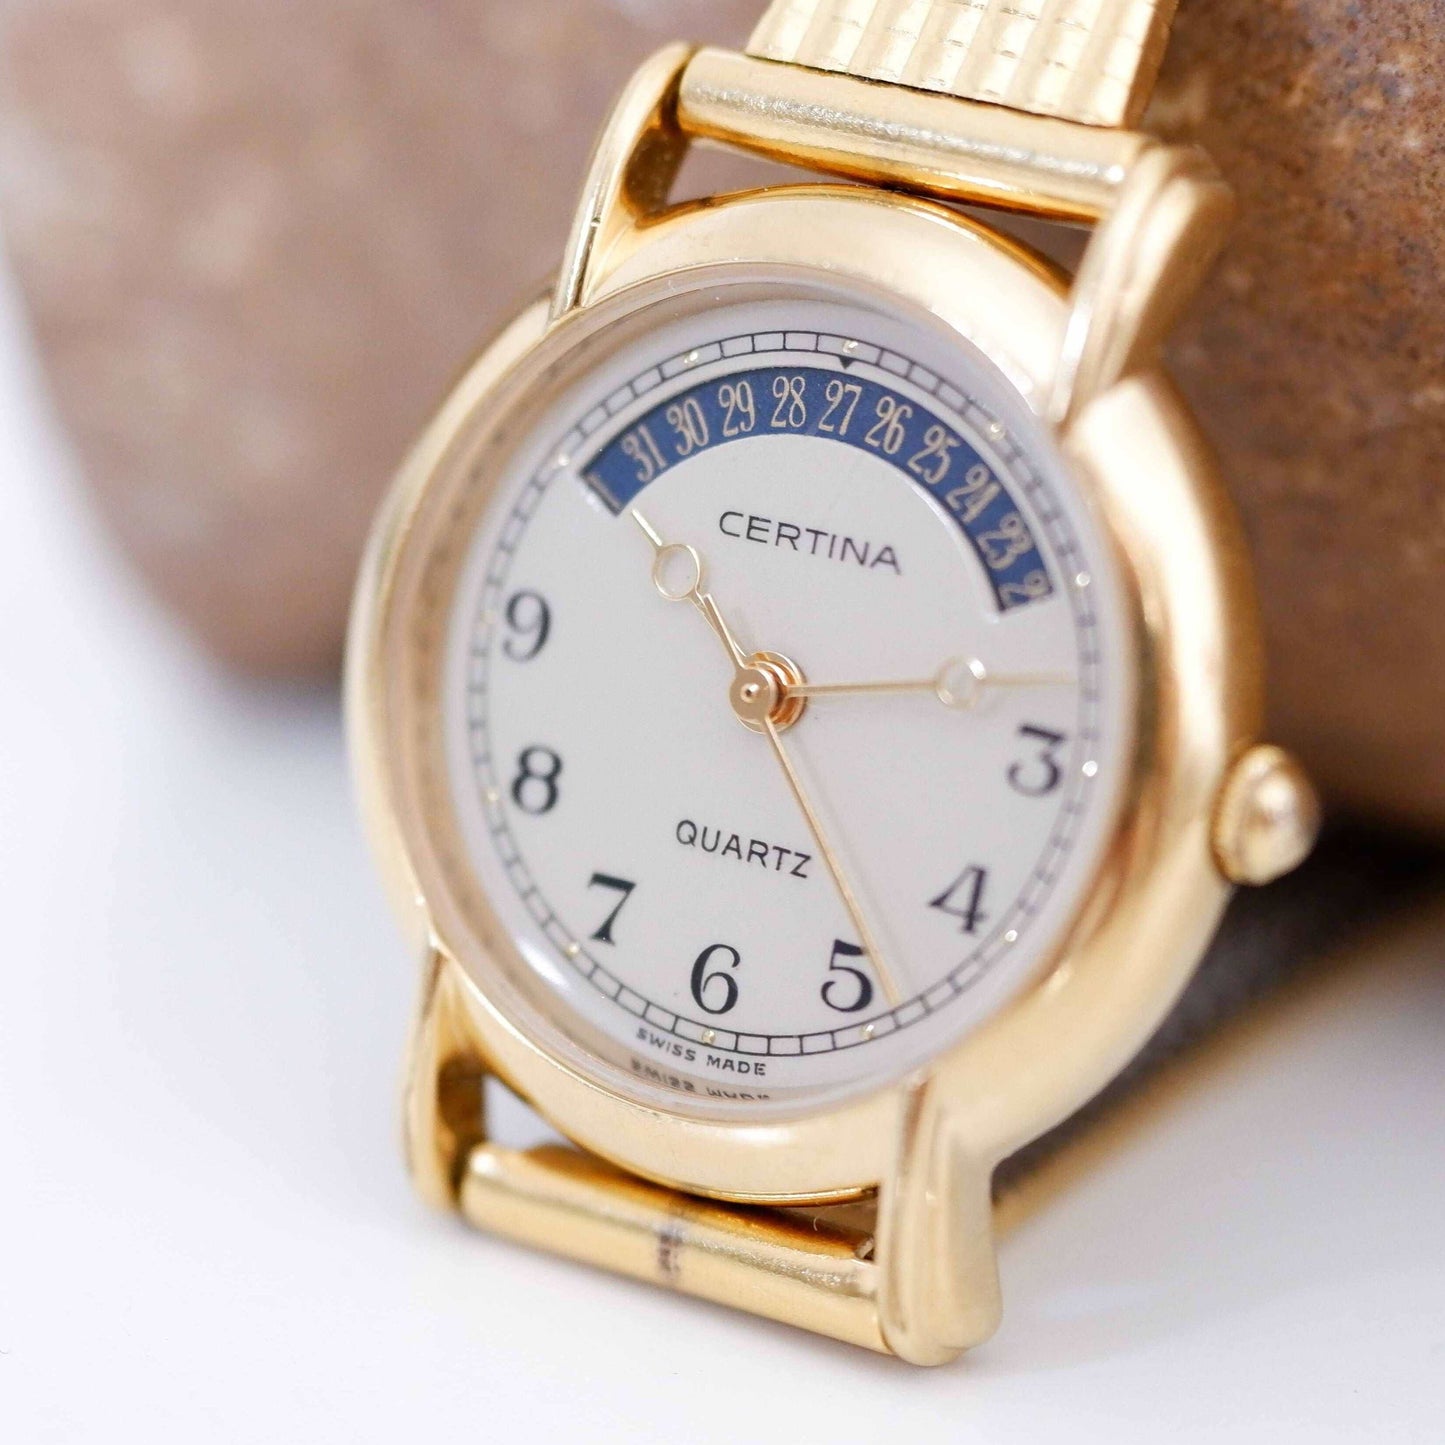 Certina Vintage Ladies Watch: 90s Gold, Blue Date and Classic Numerals, Slight Right Side